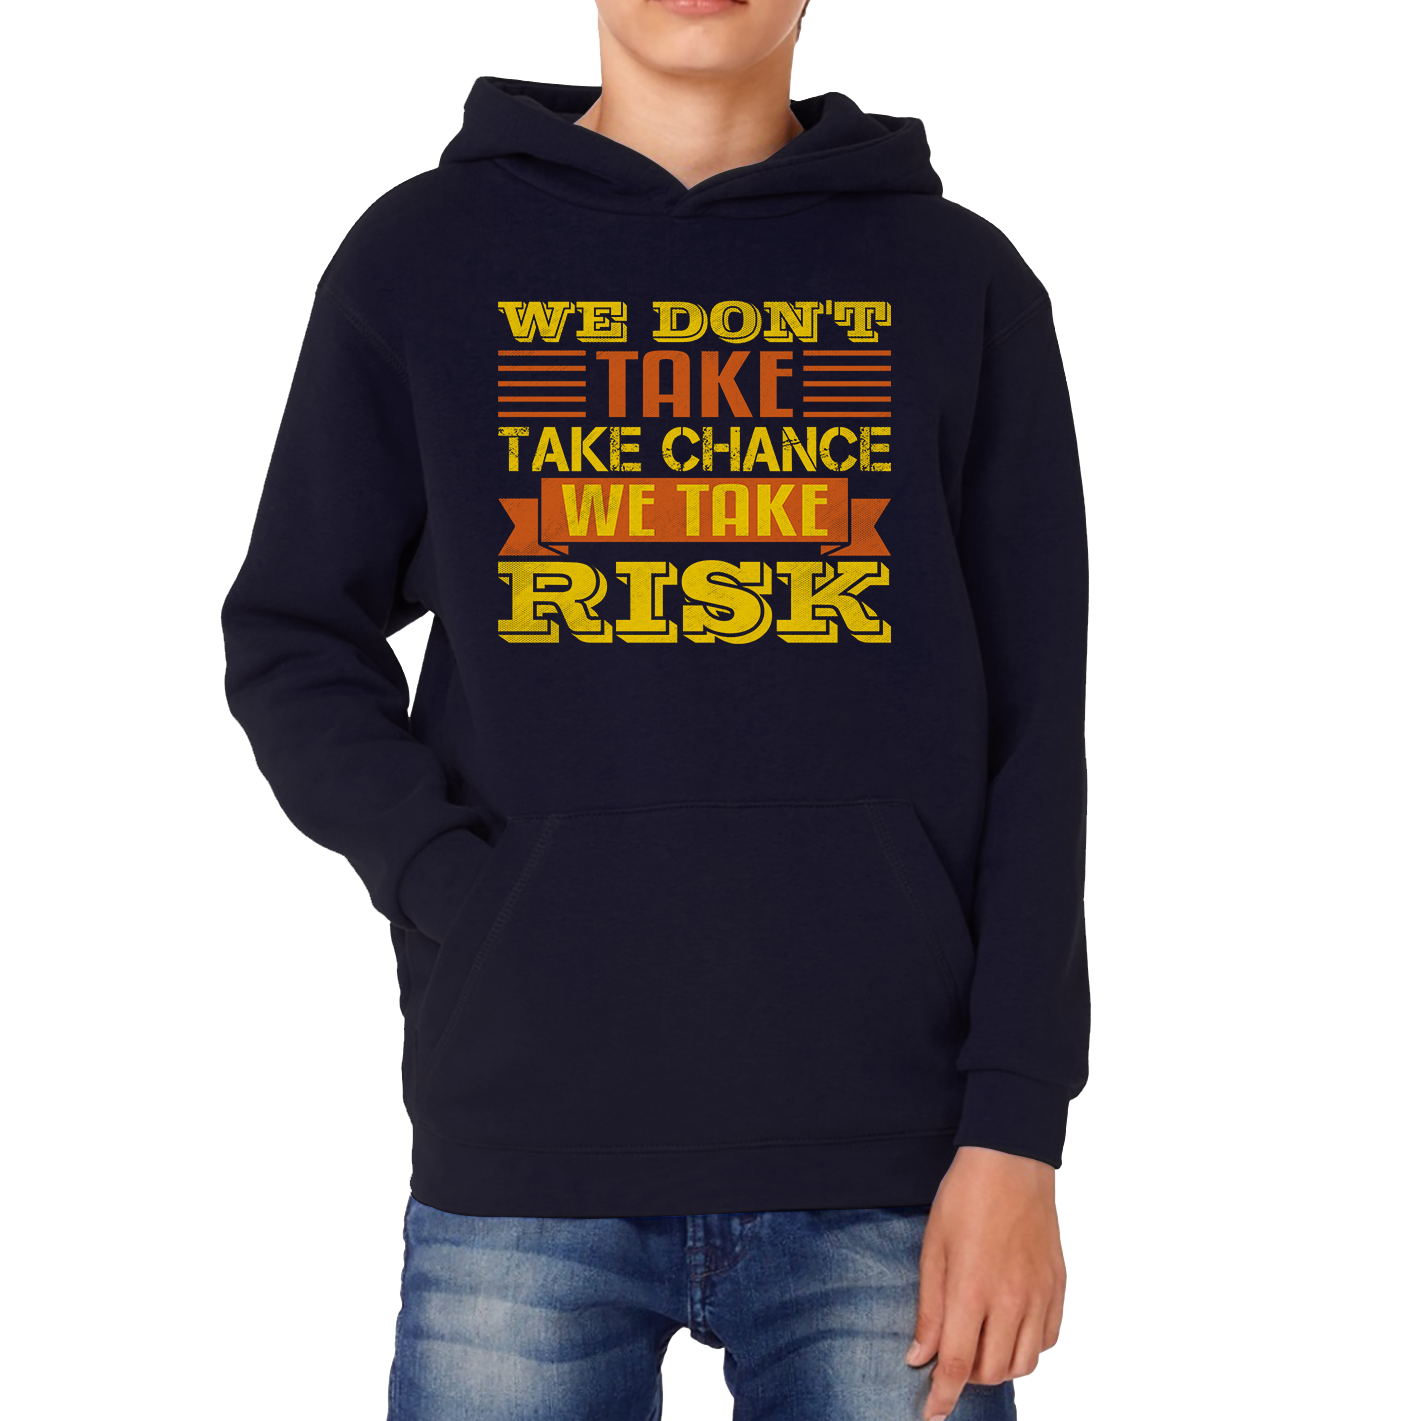 We Don't Take Chance We Take Risk, Risk Taker Funny Saying Kids Hoodie